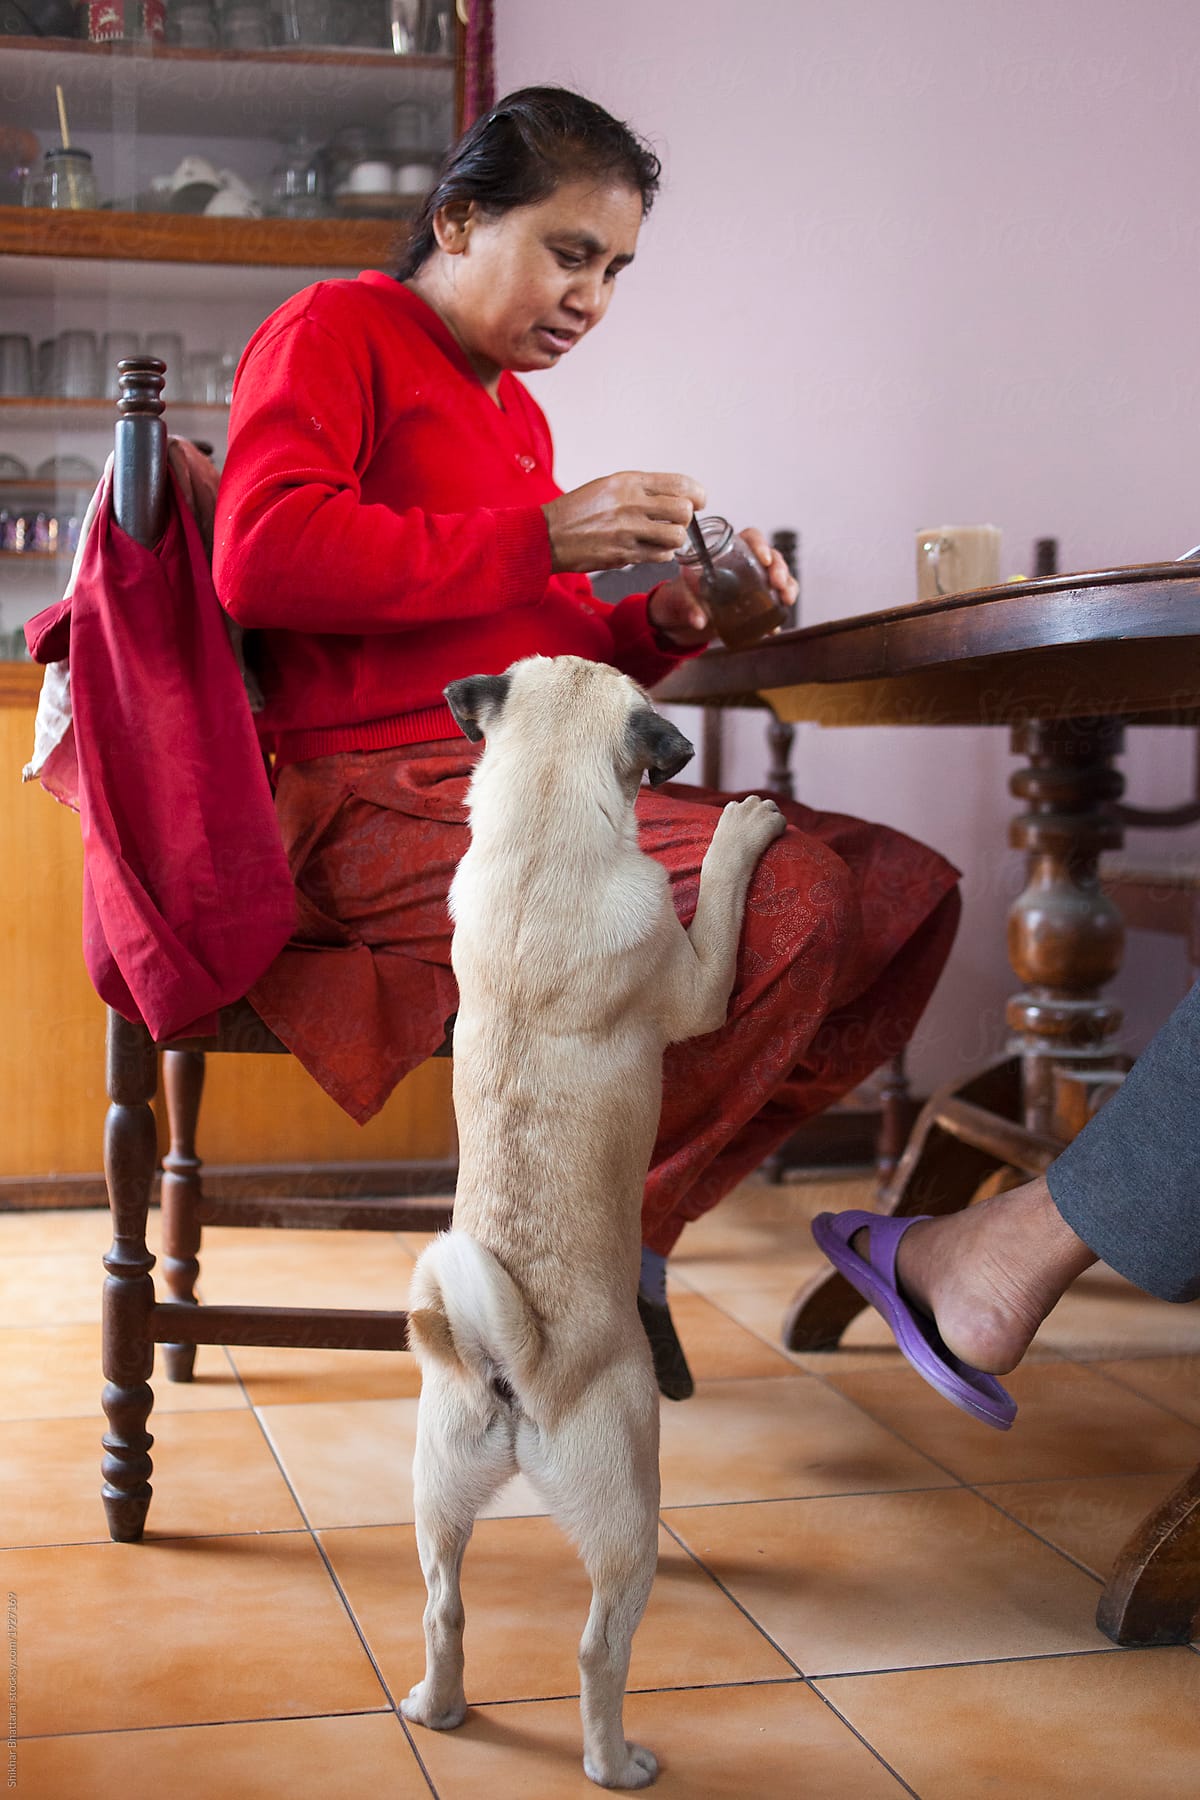 Bhunte, the naughty pug, begging for breakfast in a south asian household.